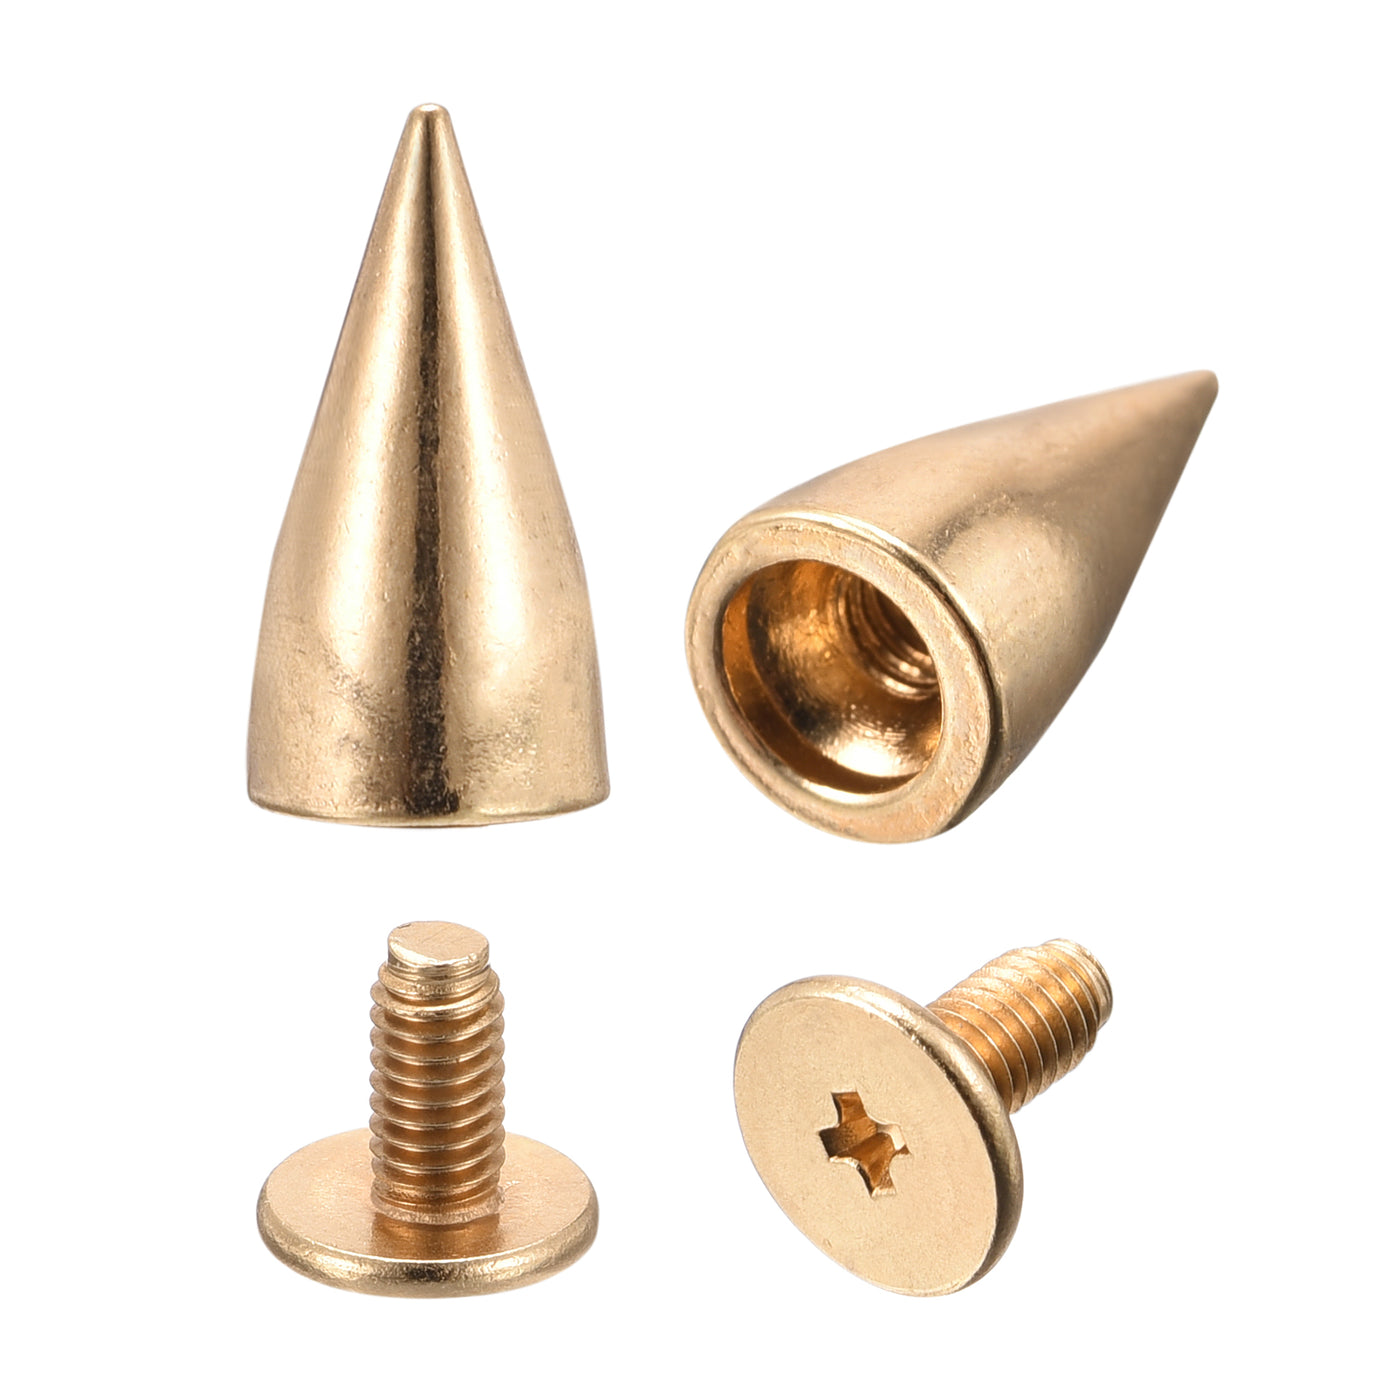 Uxcell Uxcell 7x13.5mm Screw Back Stud Rivets Spikes Zinc Alloy for DIY Silver Tone 100 Sets